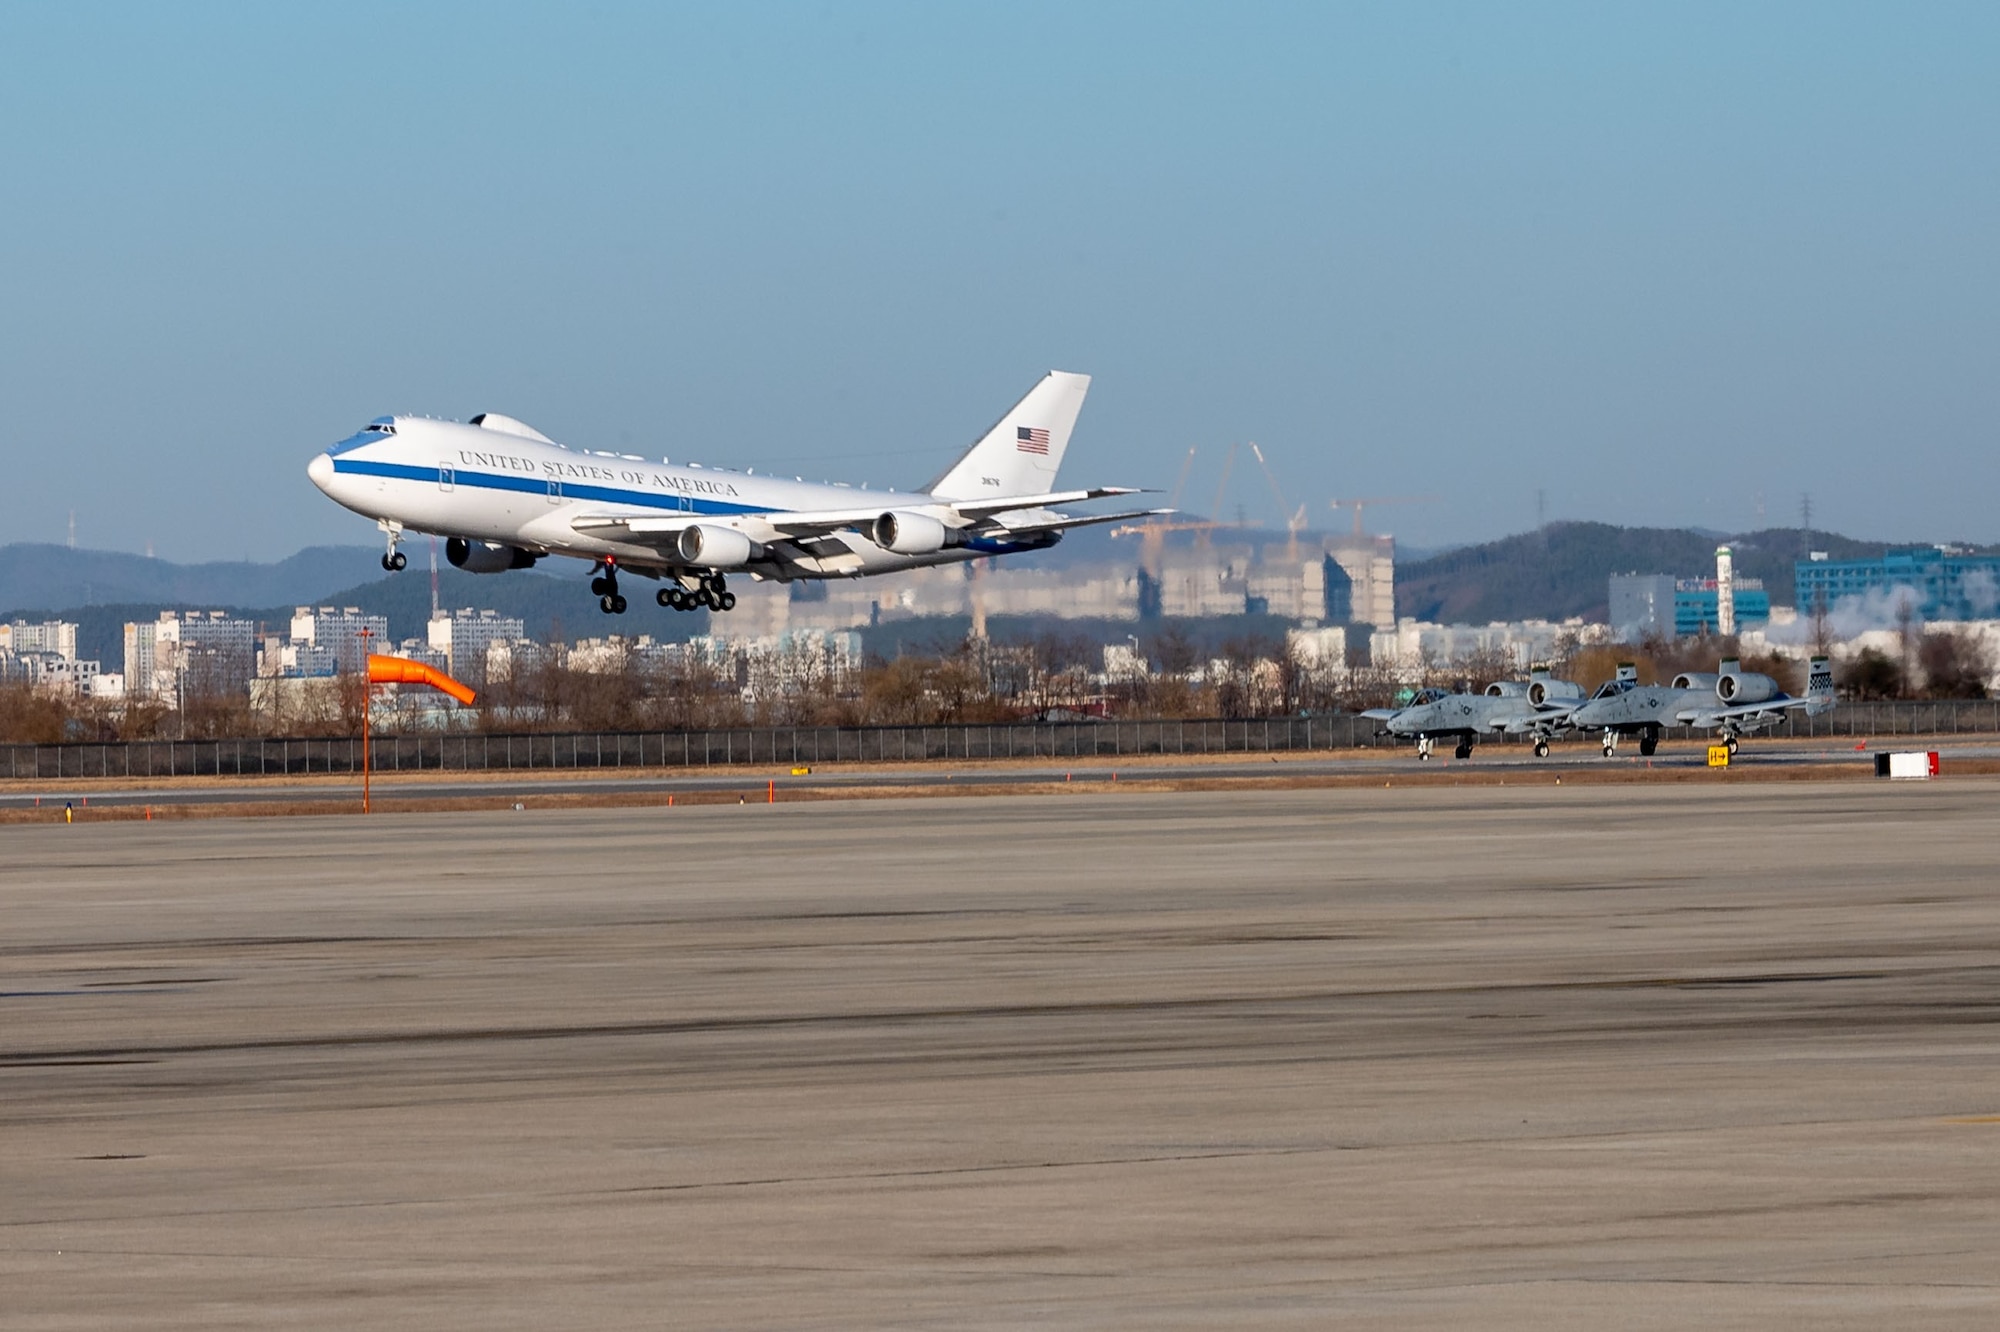 Photo of an aircraft carrying the Secretary of Defense